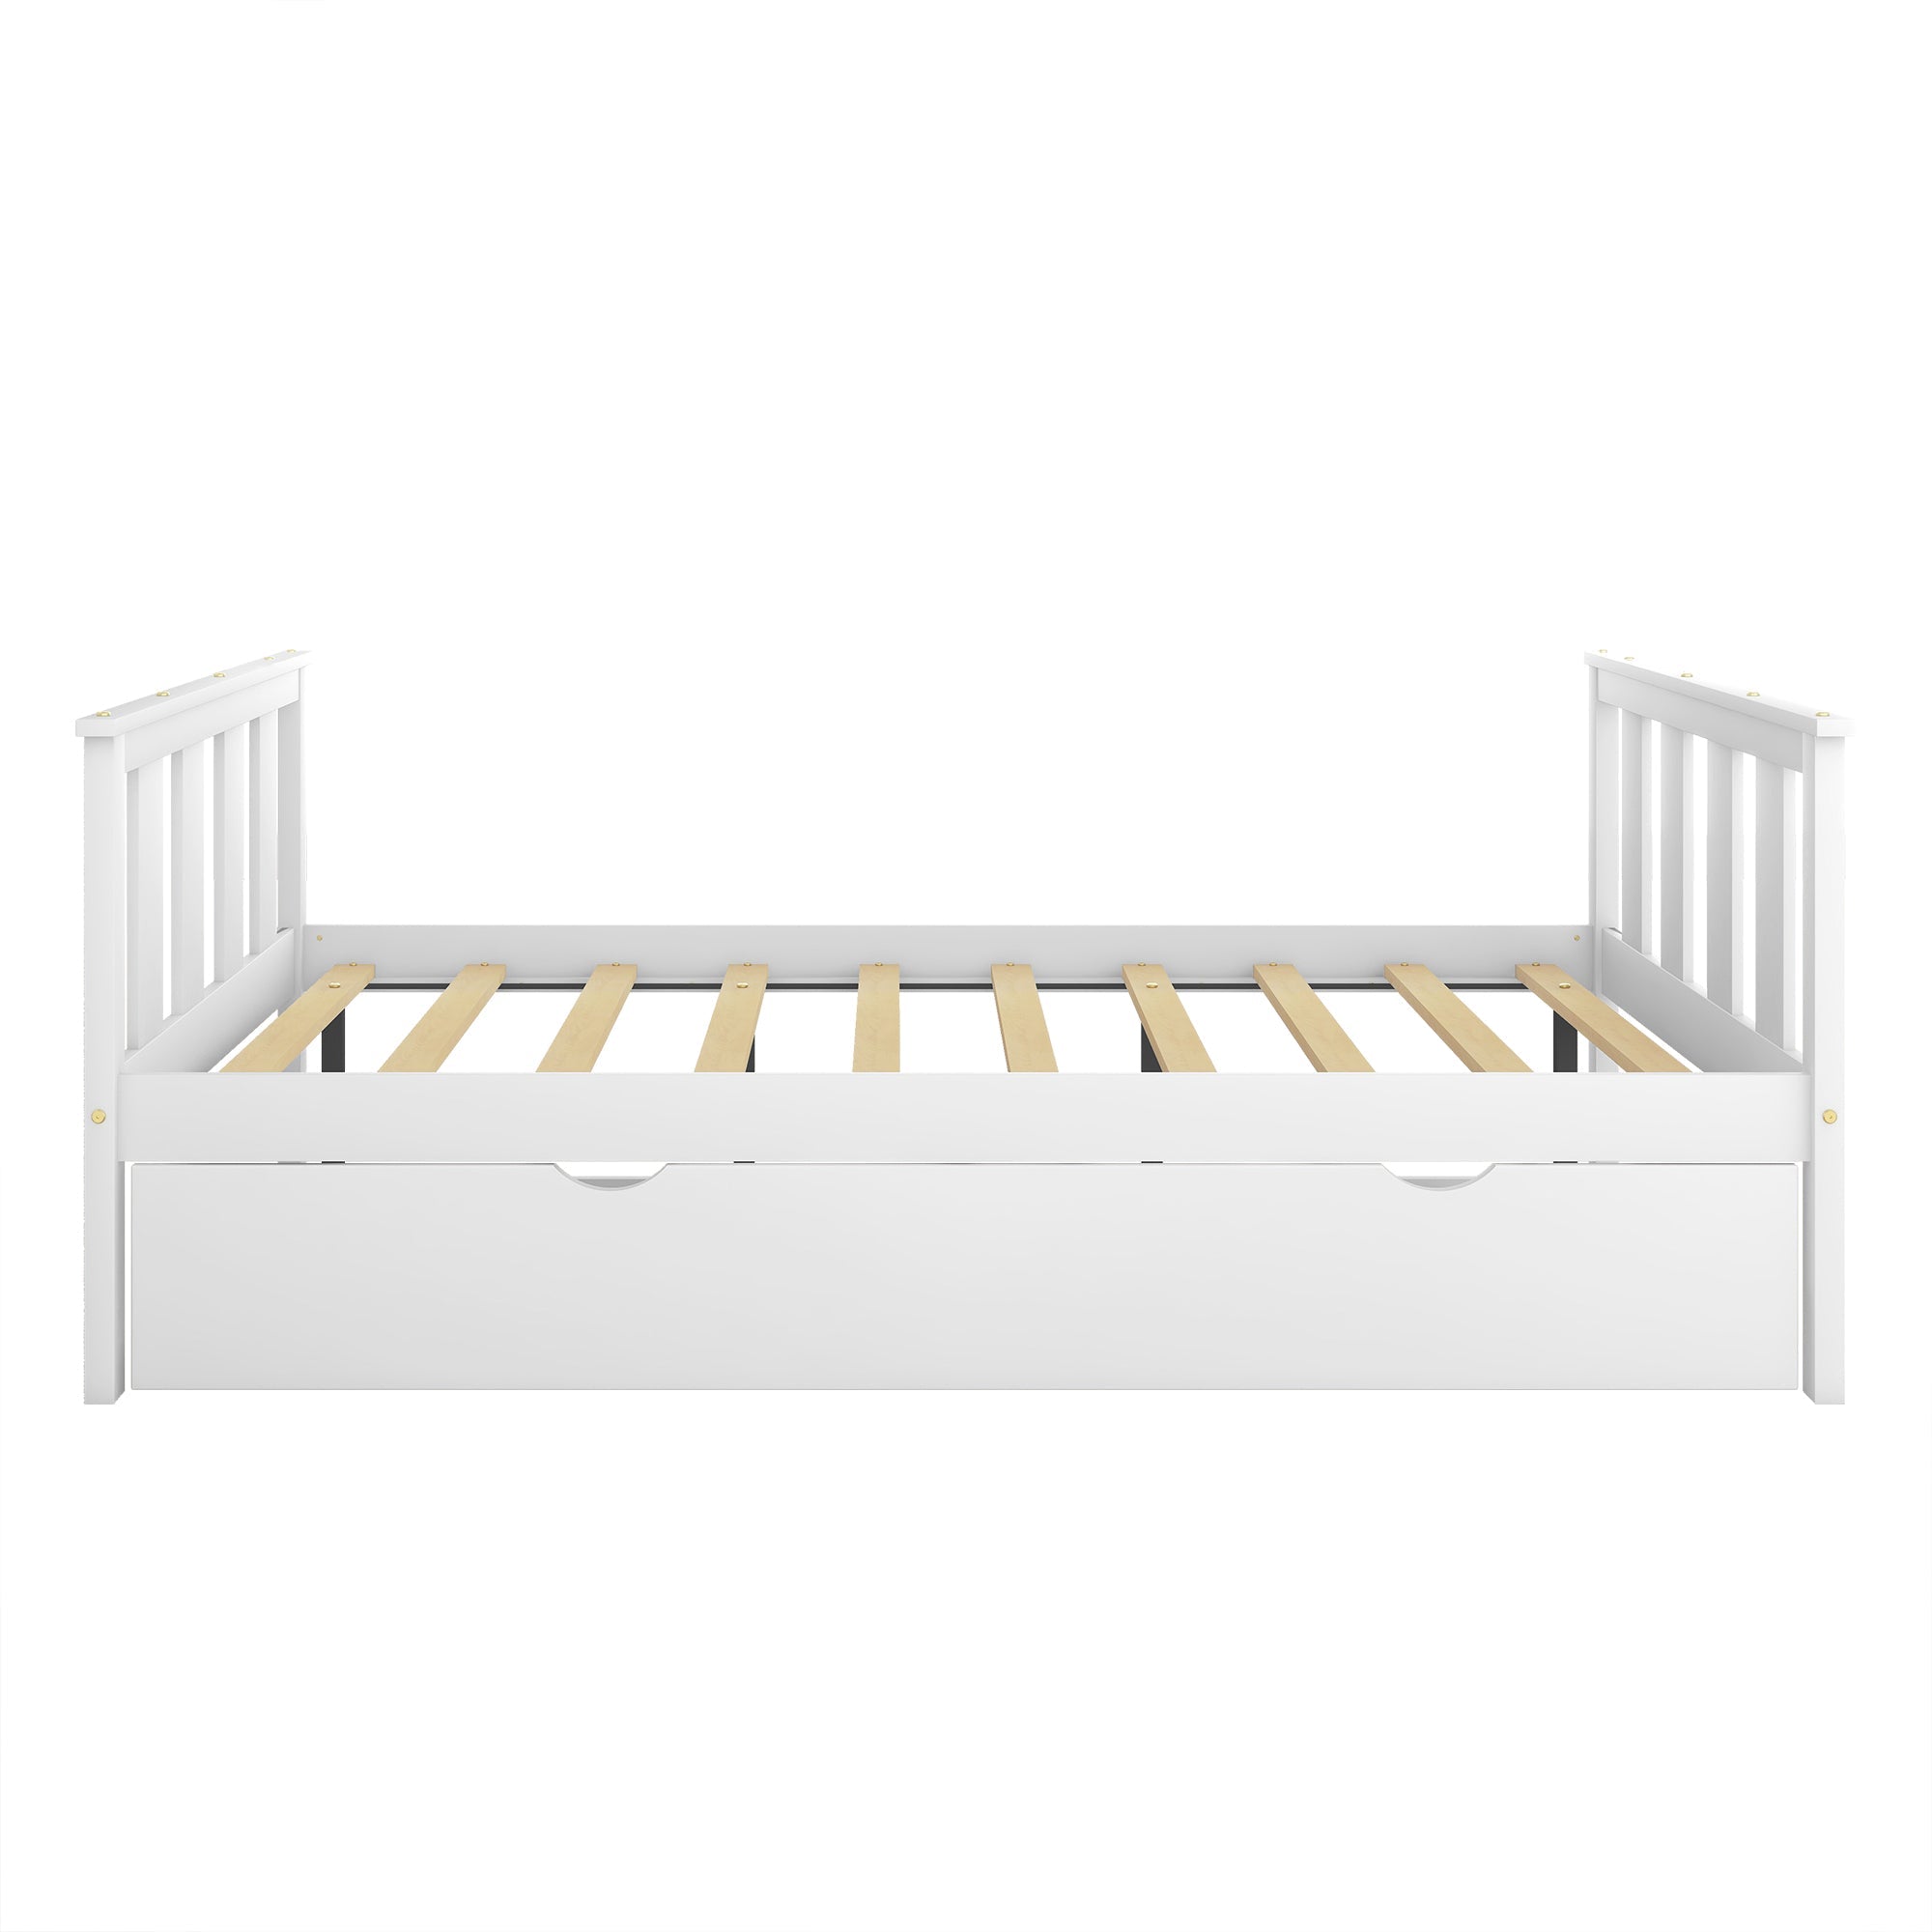 BTMWAY Full Bed with Trundle, Modern Full Size Solid Wood Platform Bed Frame with Headboard, Footboard and Trundle Included, No Box Spring Needed, Trundle Bed for Kids Teens Adults, White